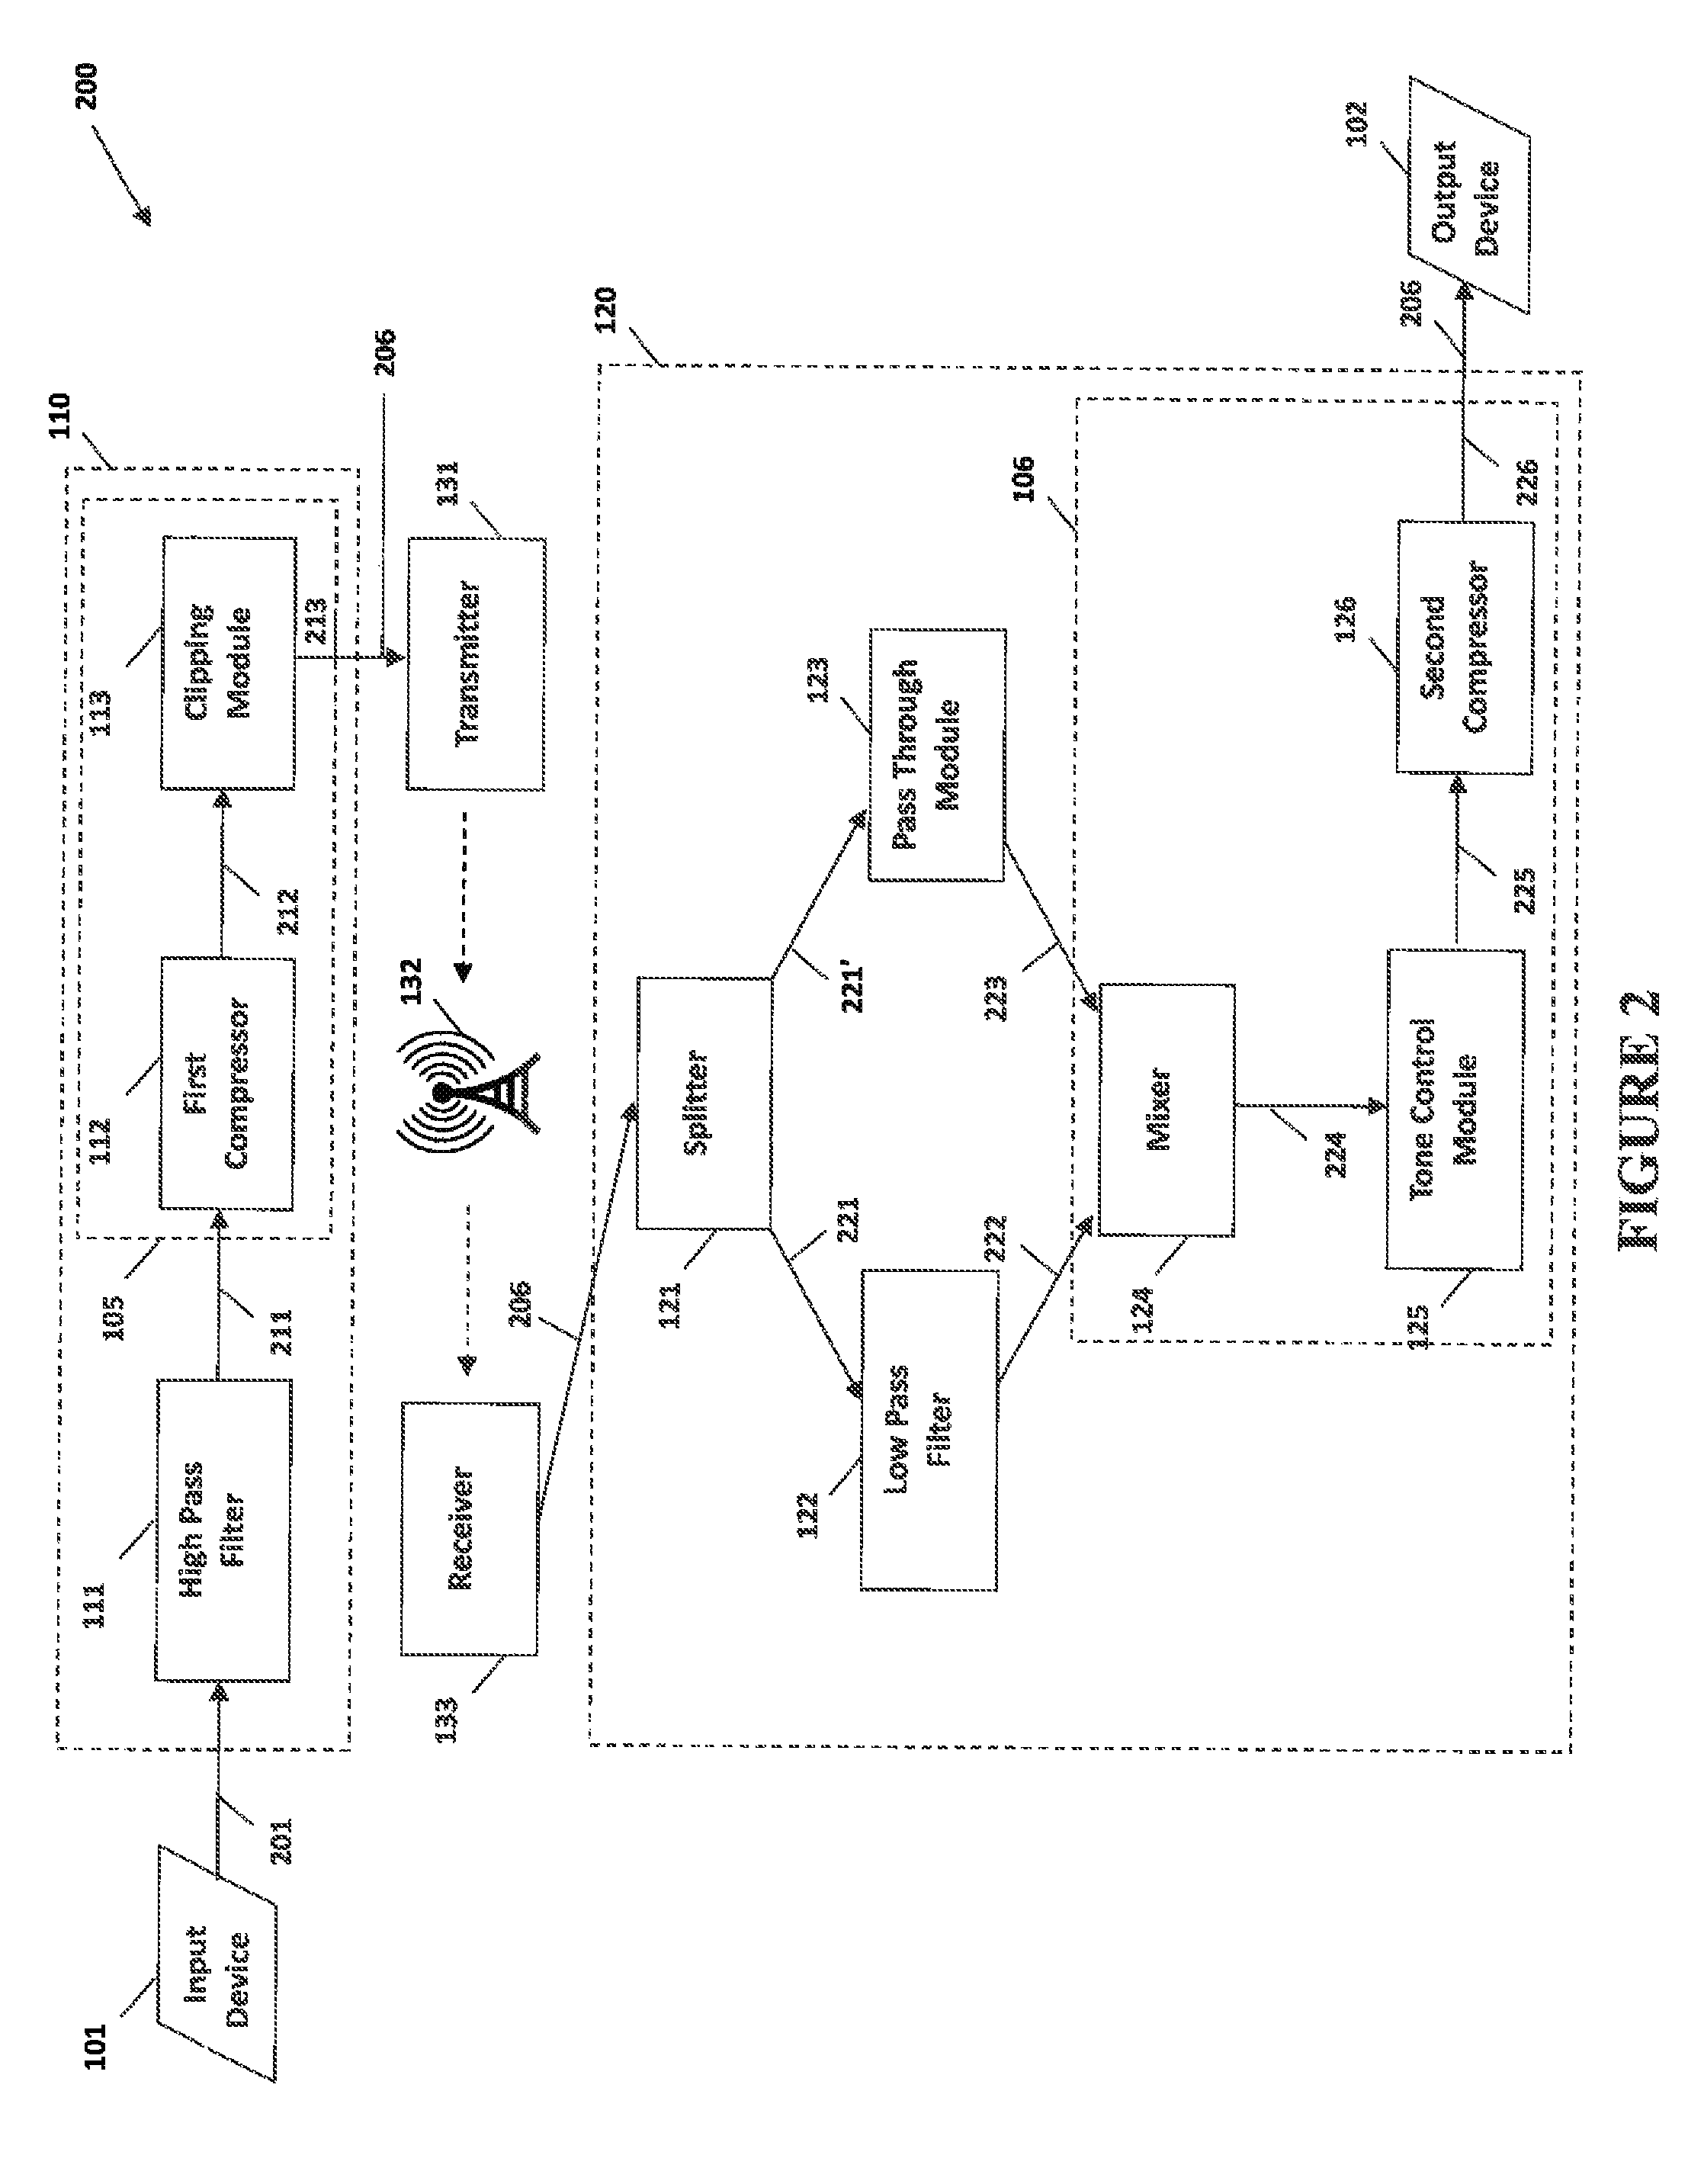 System and method for narrow bandwidth digital signal processing